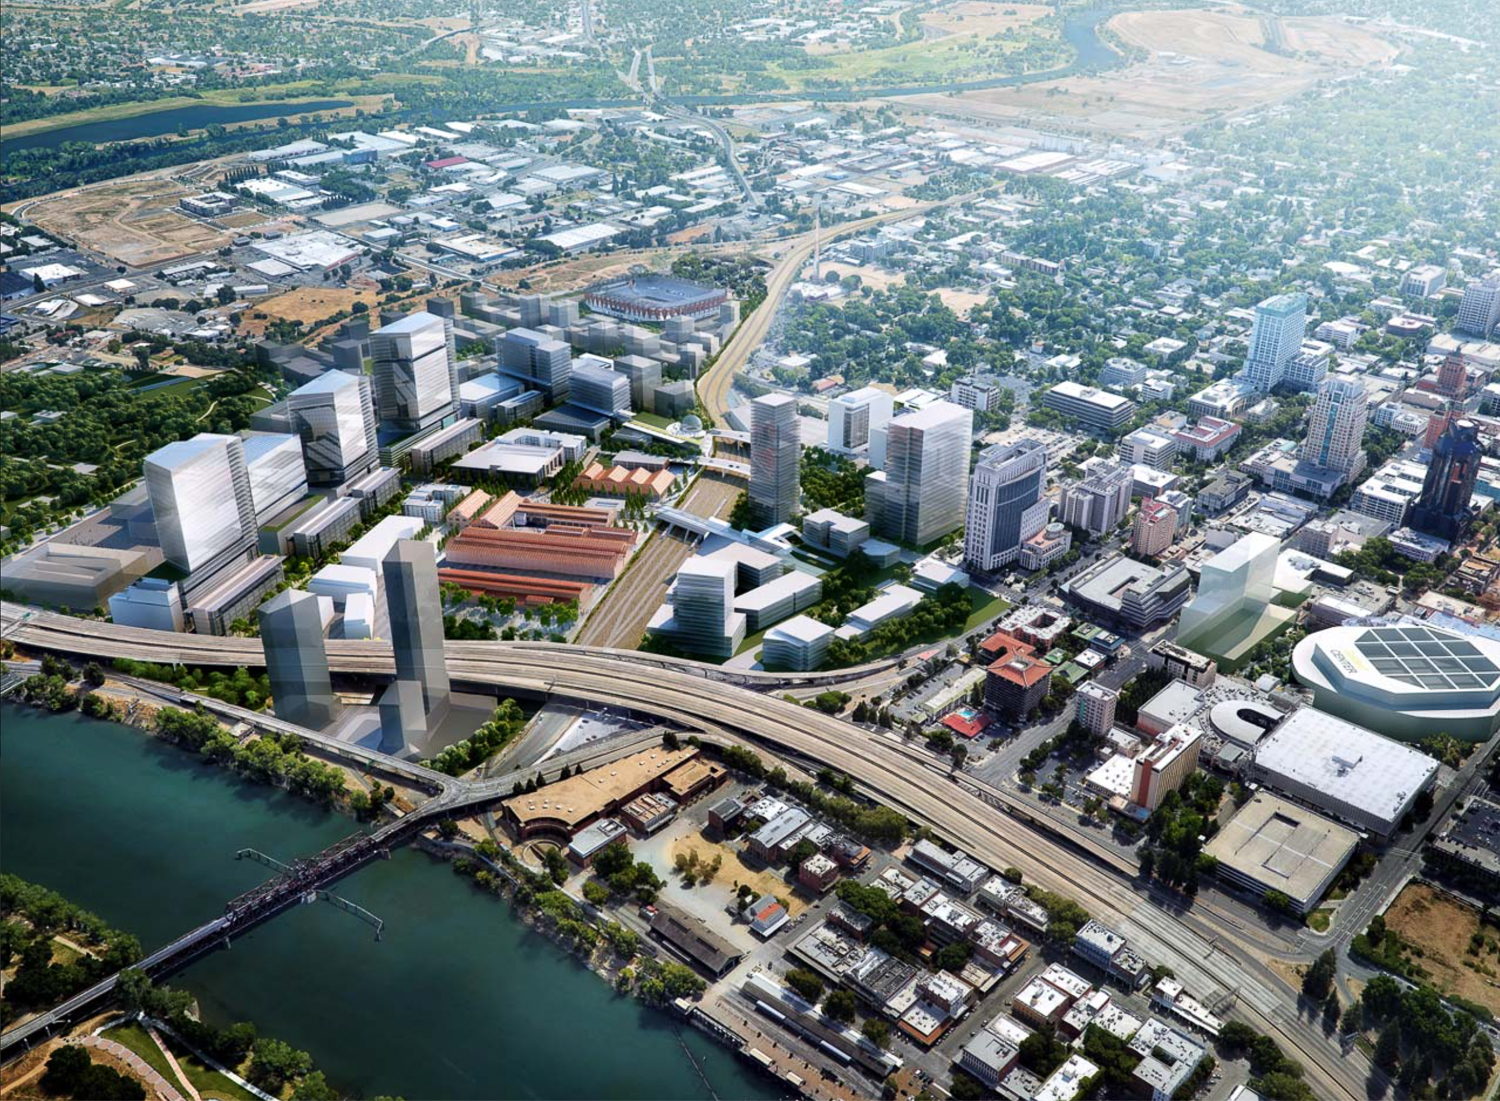 Conceptual Sacramento Railyards District rendering, image courtesy of The Railyards